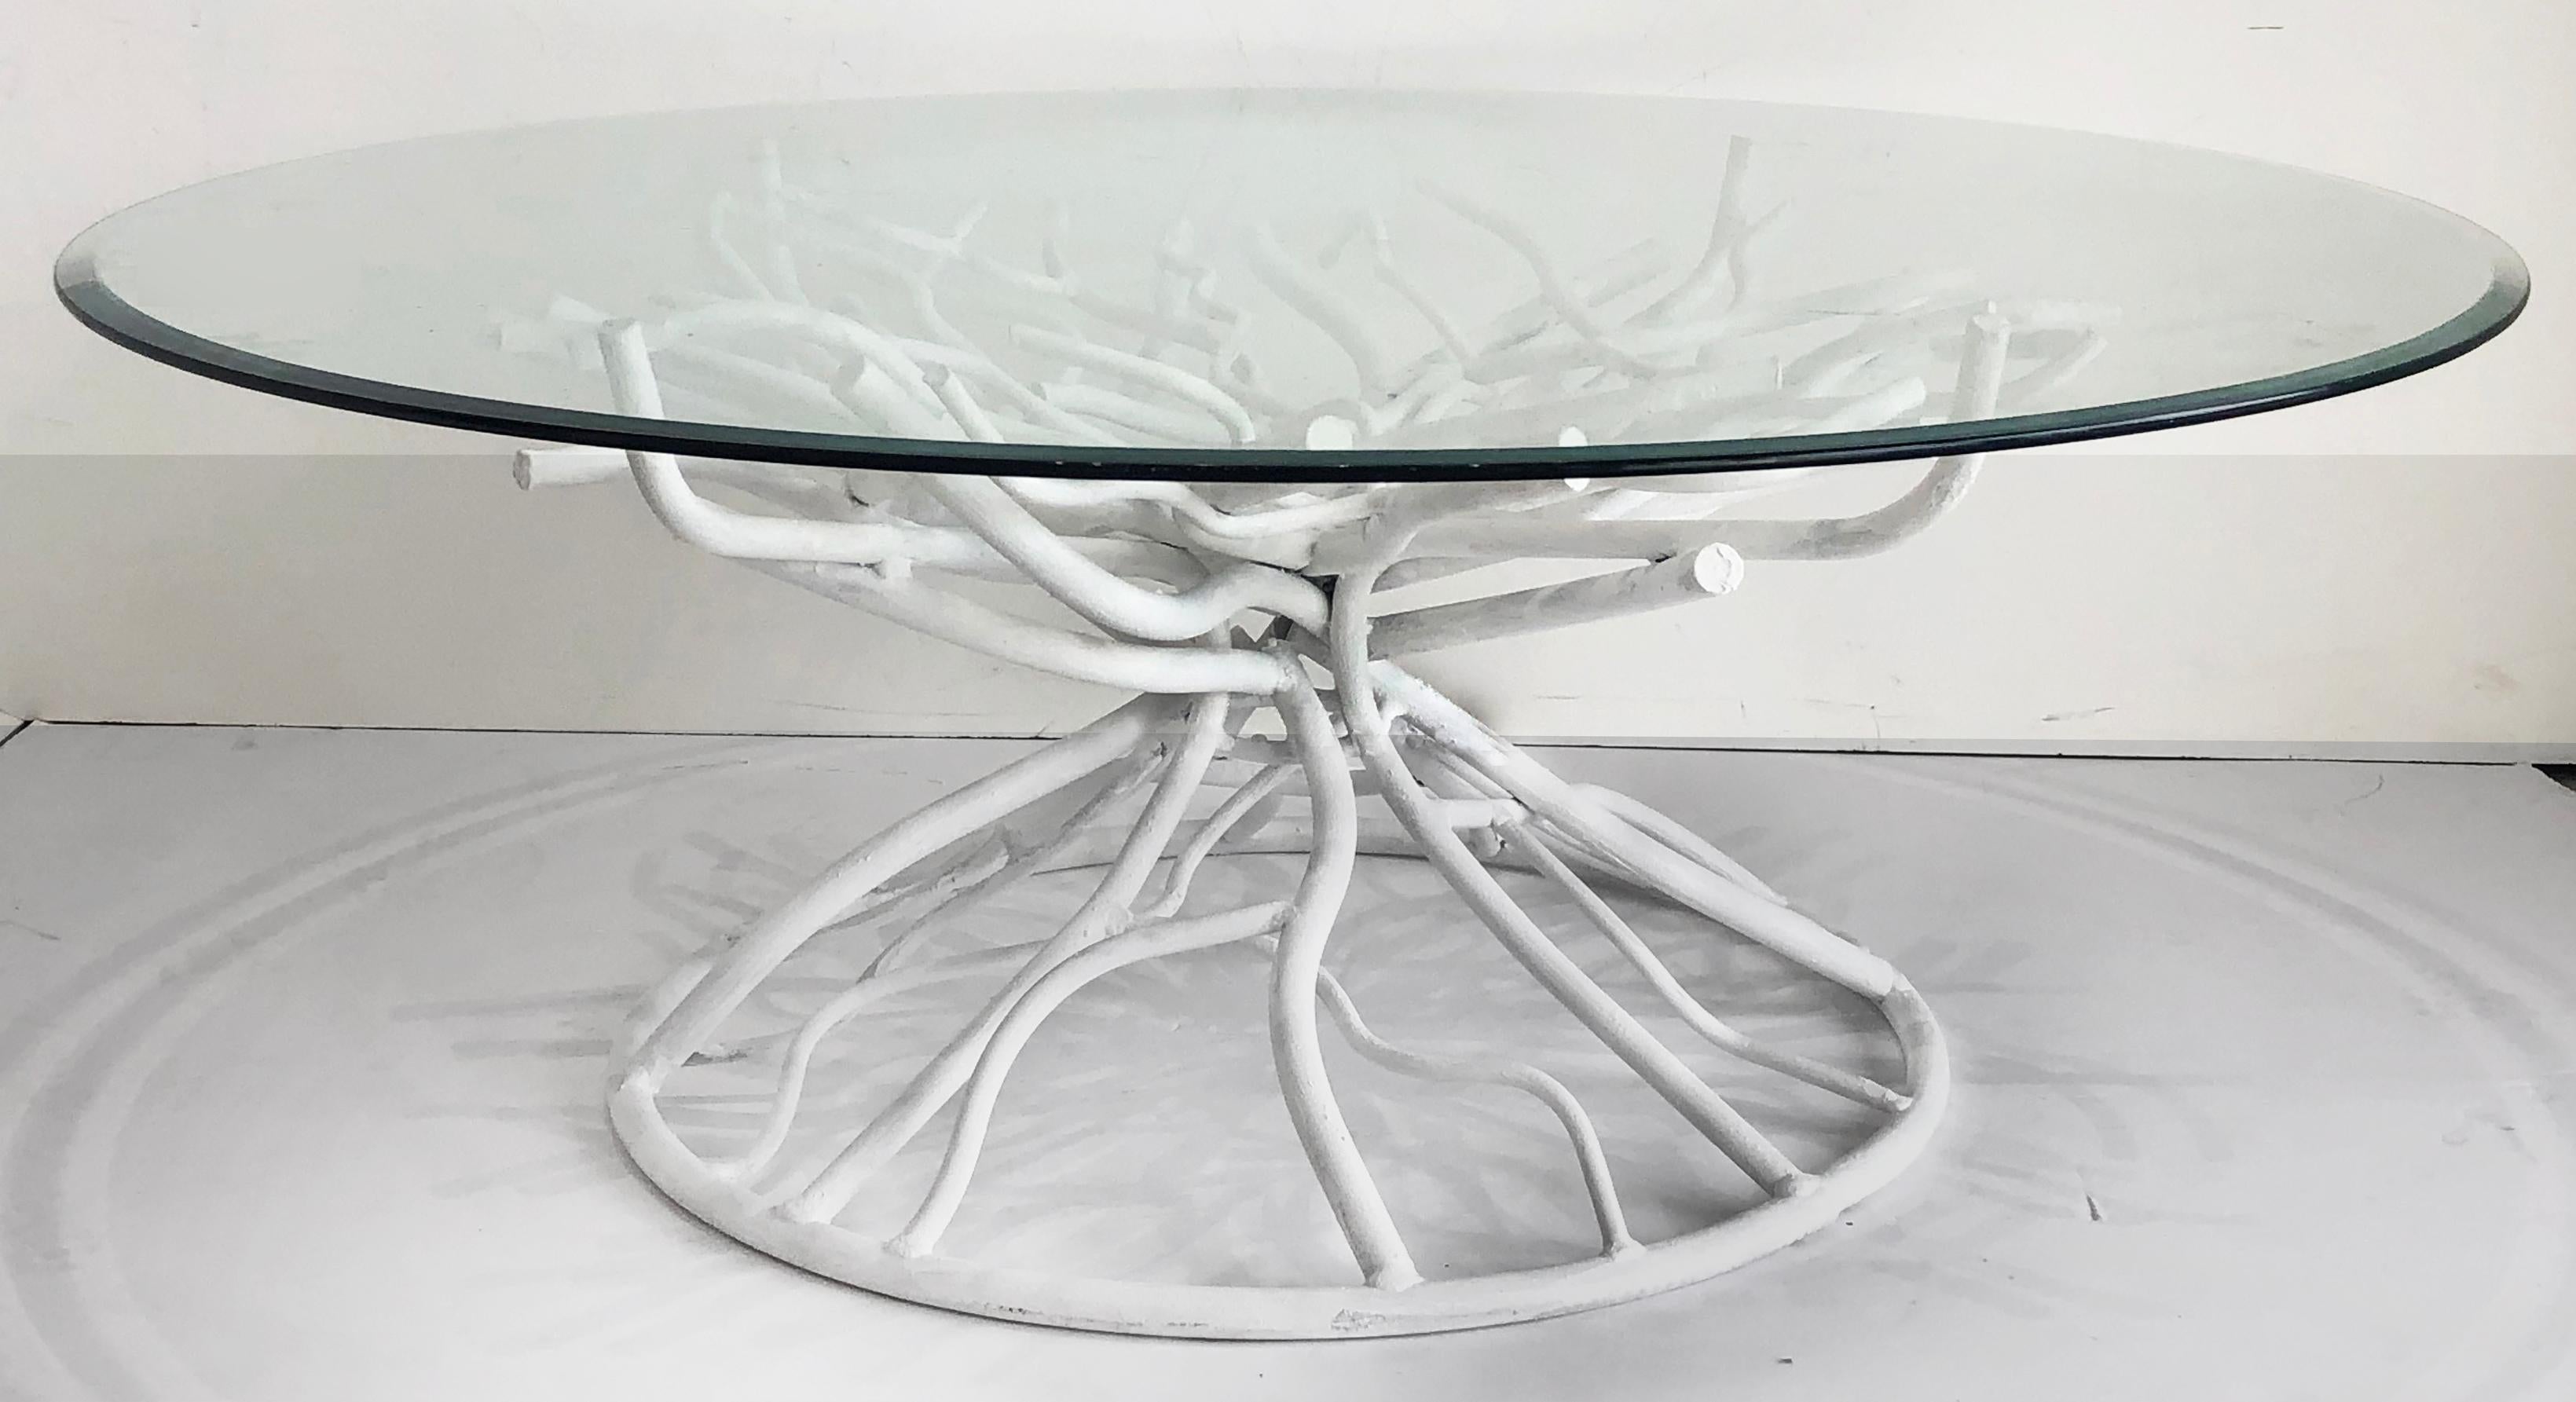 Mid-Century Modern metal faux-coral twig coffee table, beveled glass top

Offered is a Mid-Century Modern metal Faux-coral or twig coffee table with a gesso finish and a round beveled glass top. The table shows great movement and